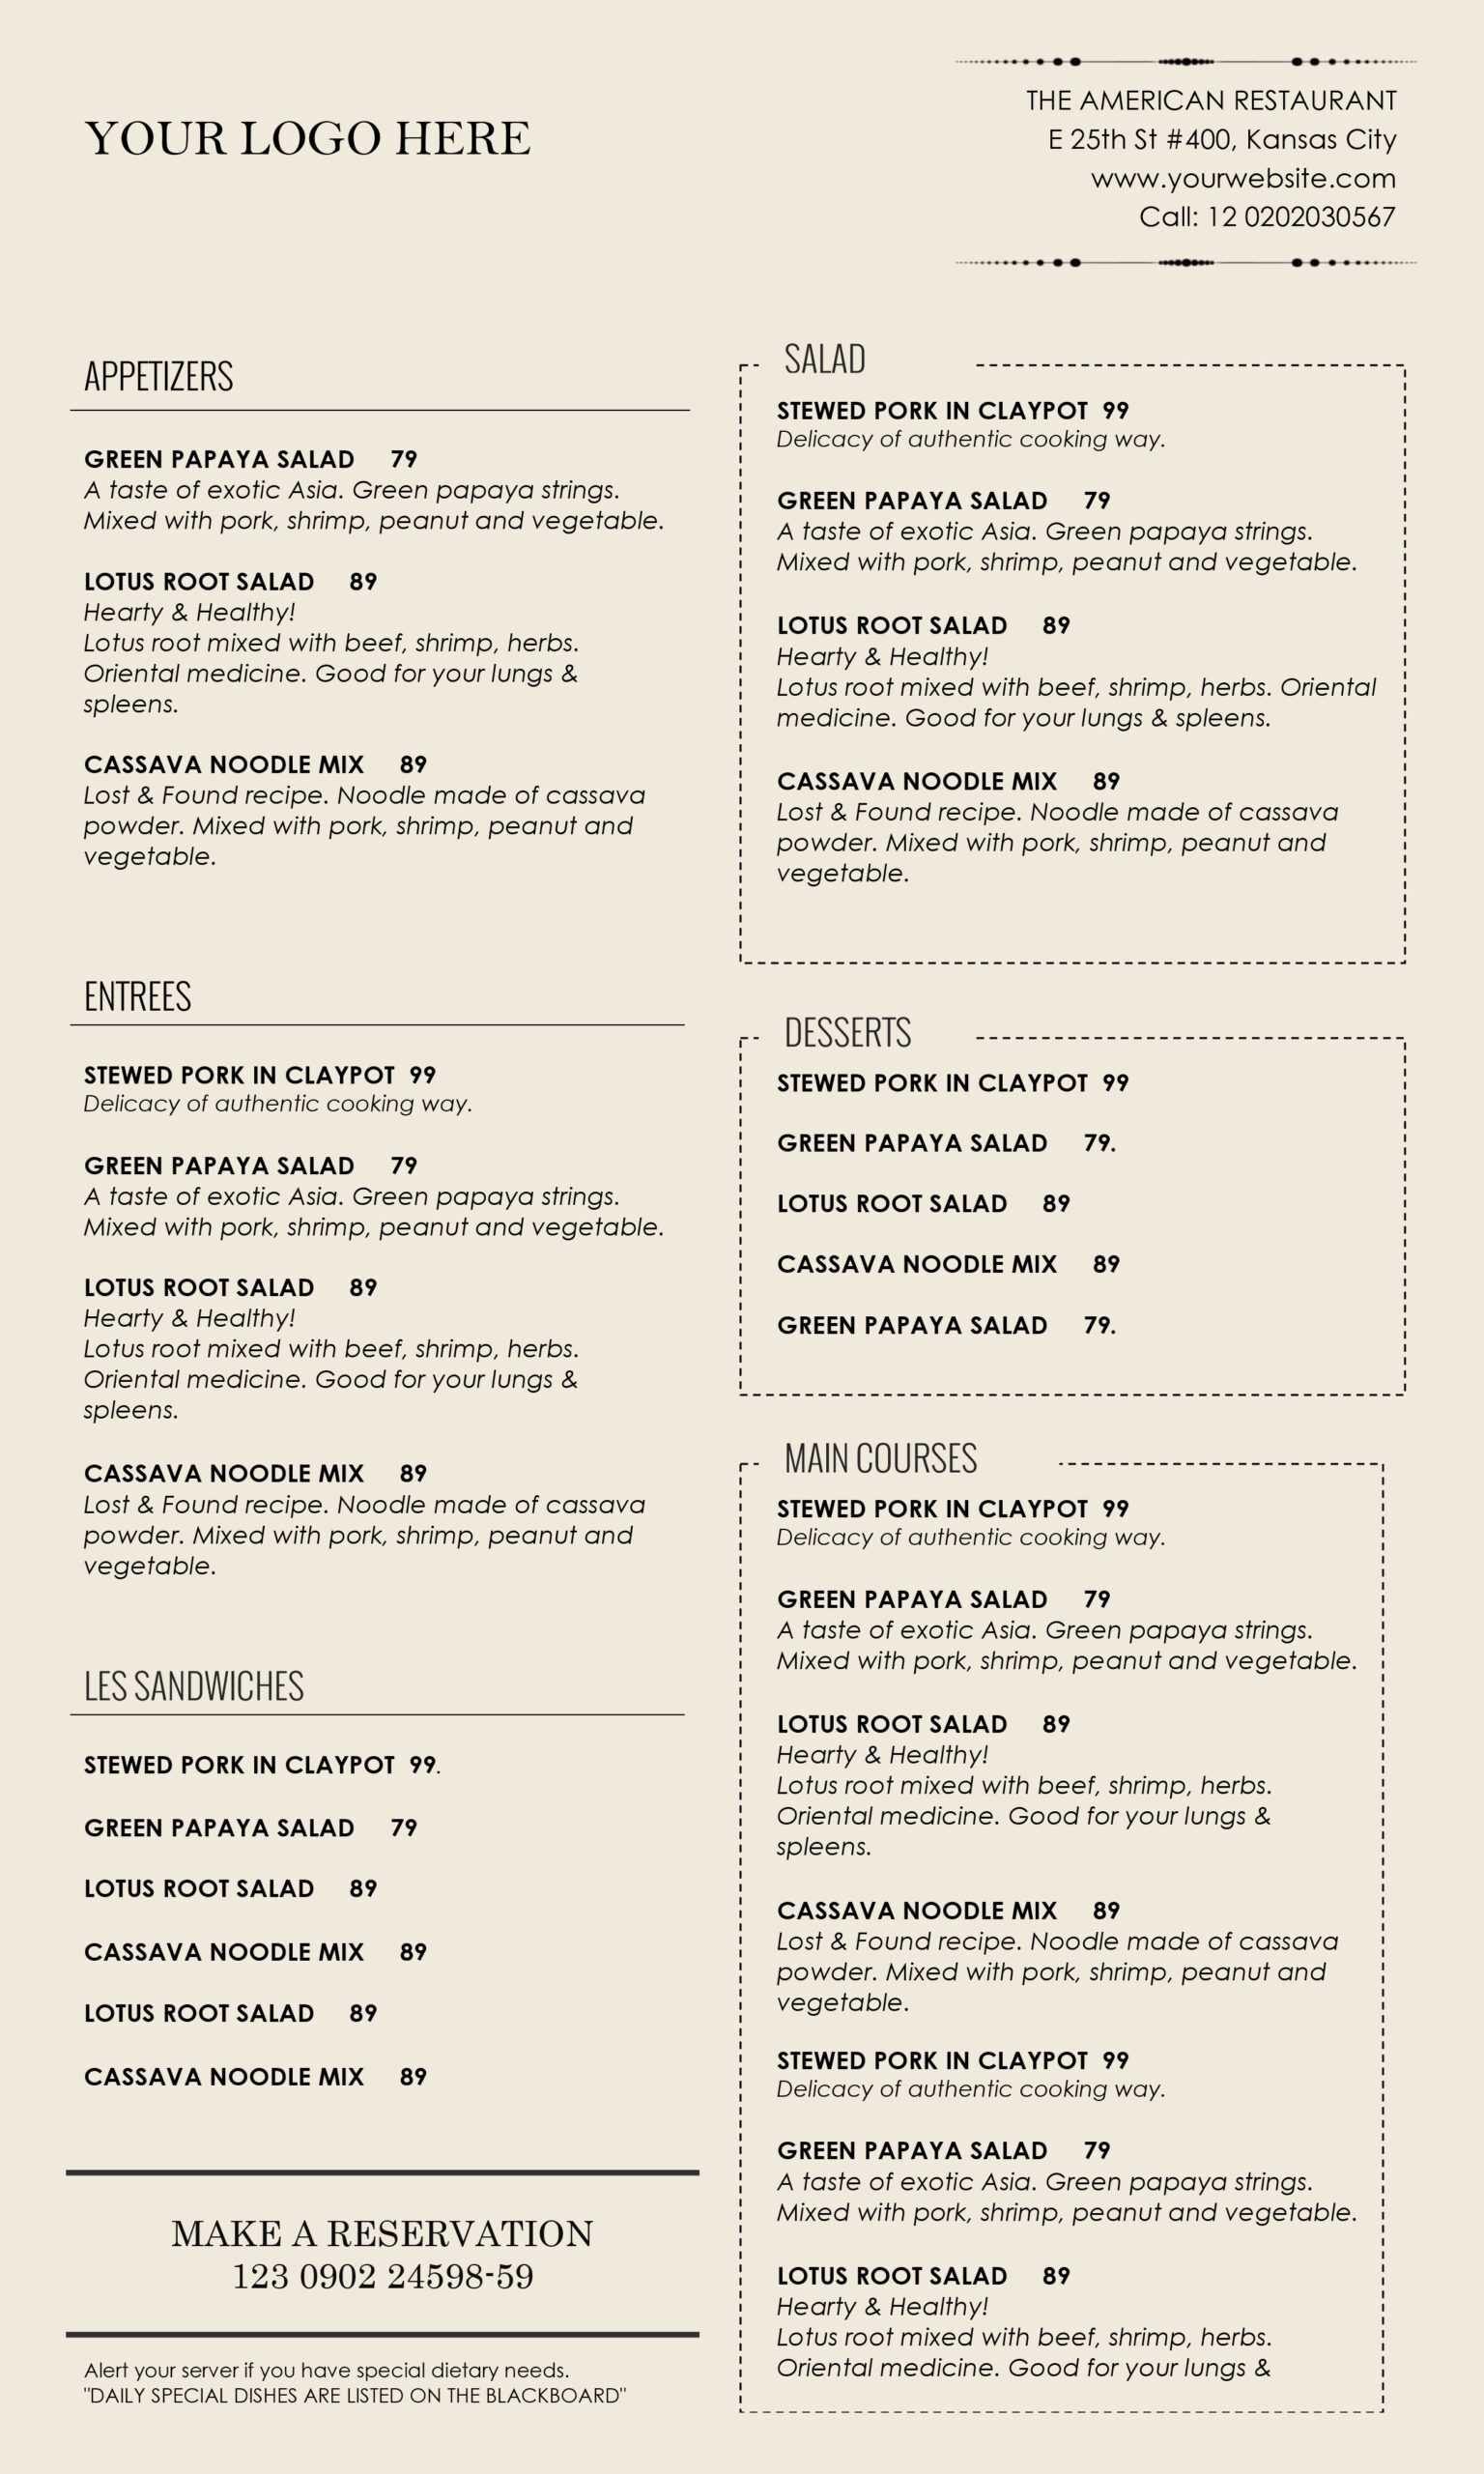 Free Cafe Menu Templates For Word – Atlantaauctionco Inside Free Cafe Menu Templates For Word